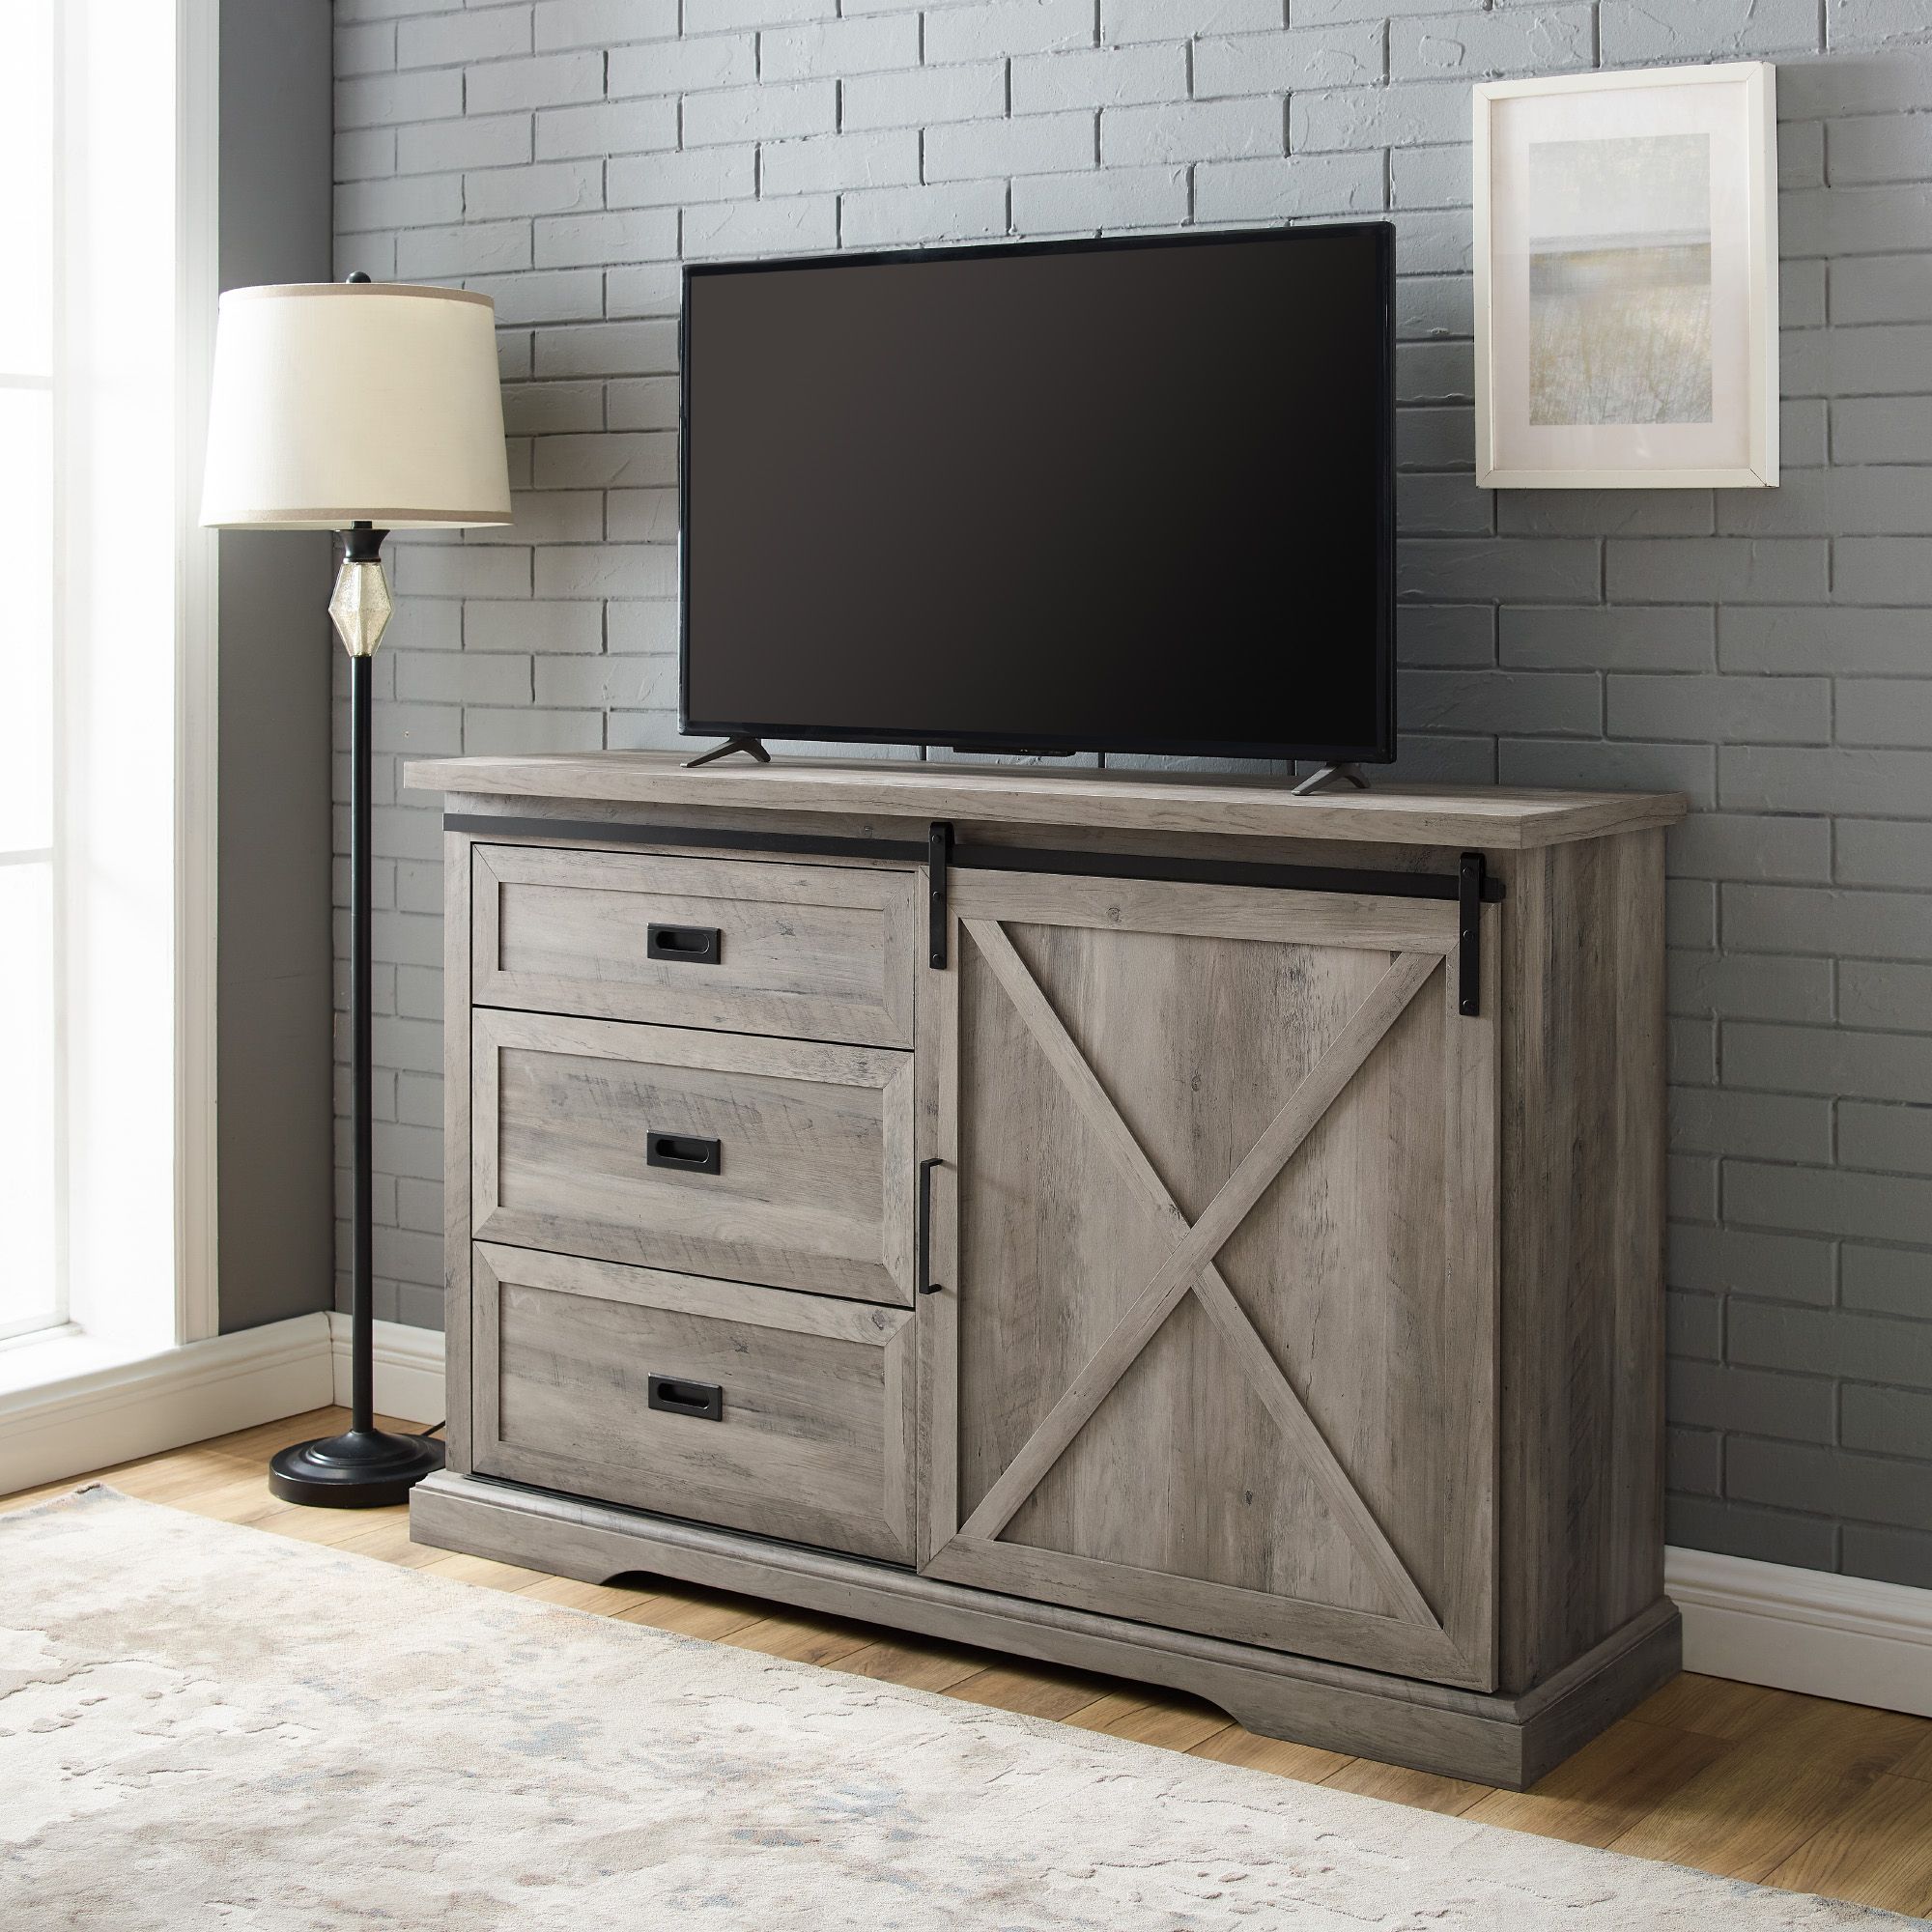 Modern 2 Glass Door Corner Tv Stands For Most Up To Date Manor Park Sliding Door Tv Stand For Tvs Up To 60", Grey (View 5 of 10)